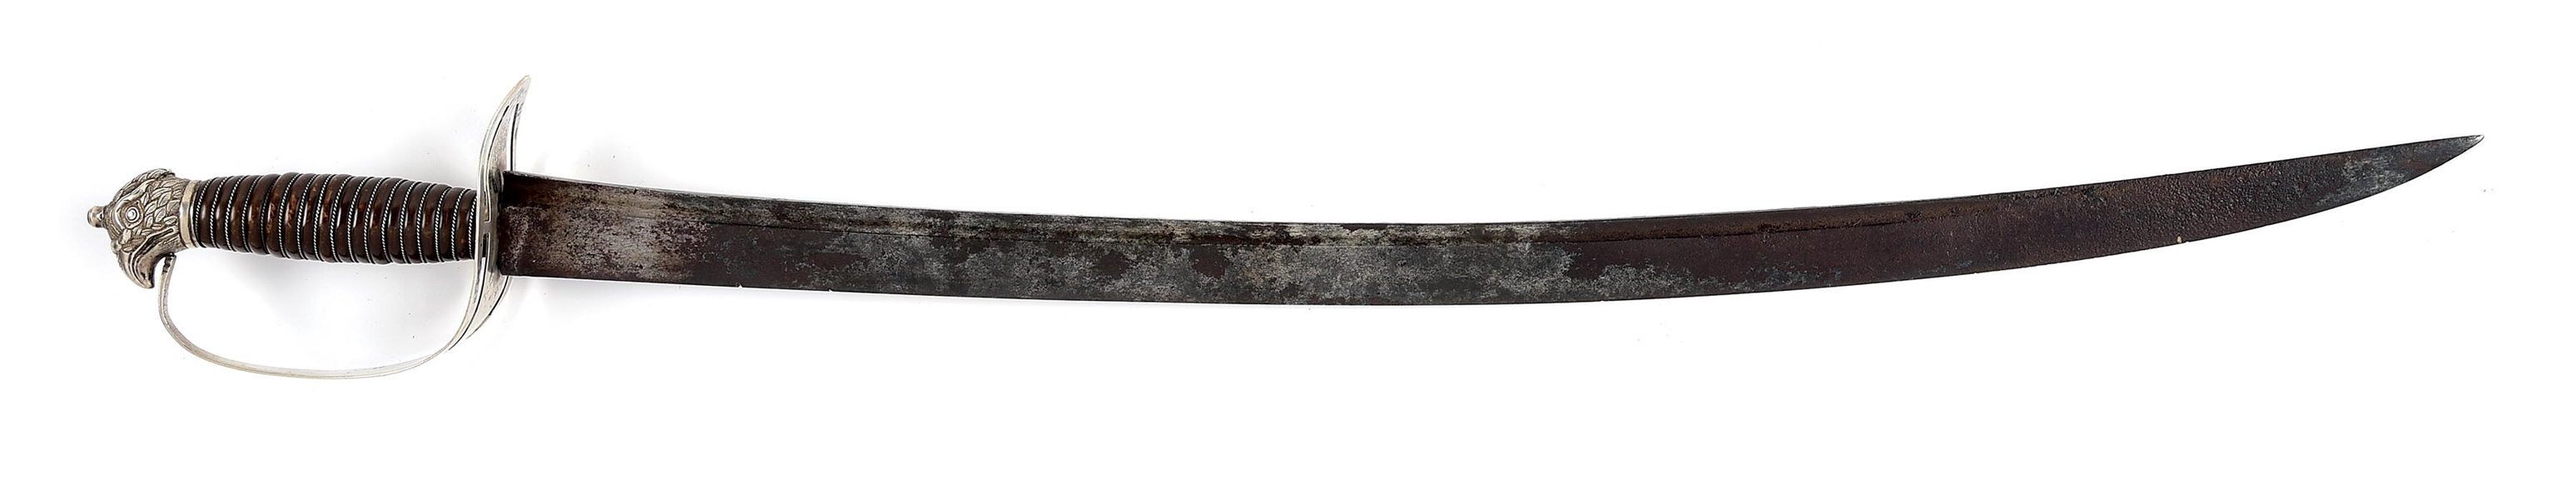 WILLIAM BALL ATTRIBUTED MARYLAND SILVER HILTED EAGLE POMMEL SWORD.